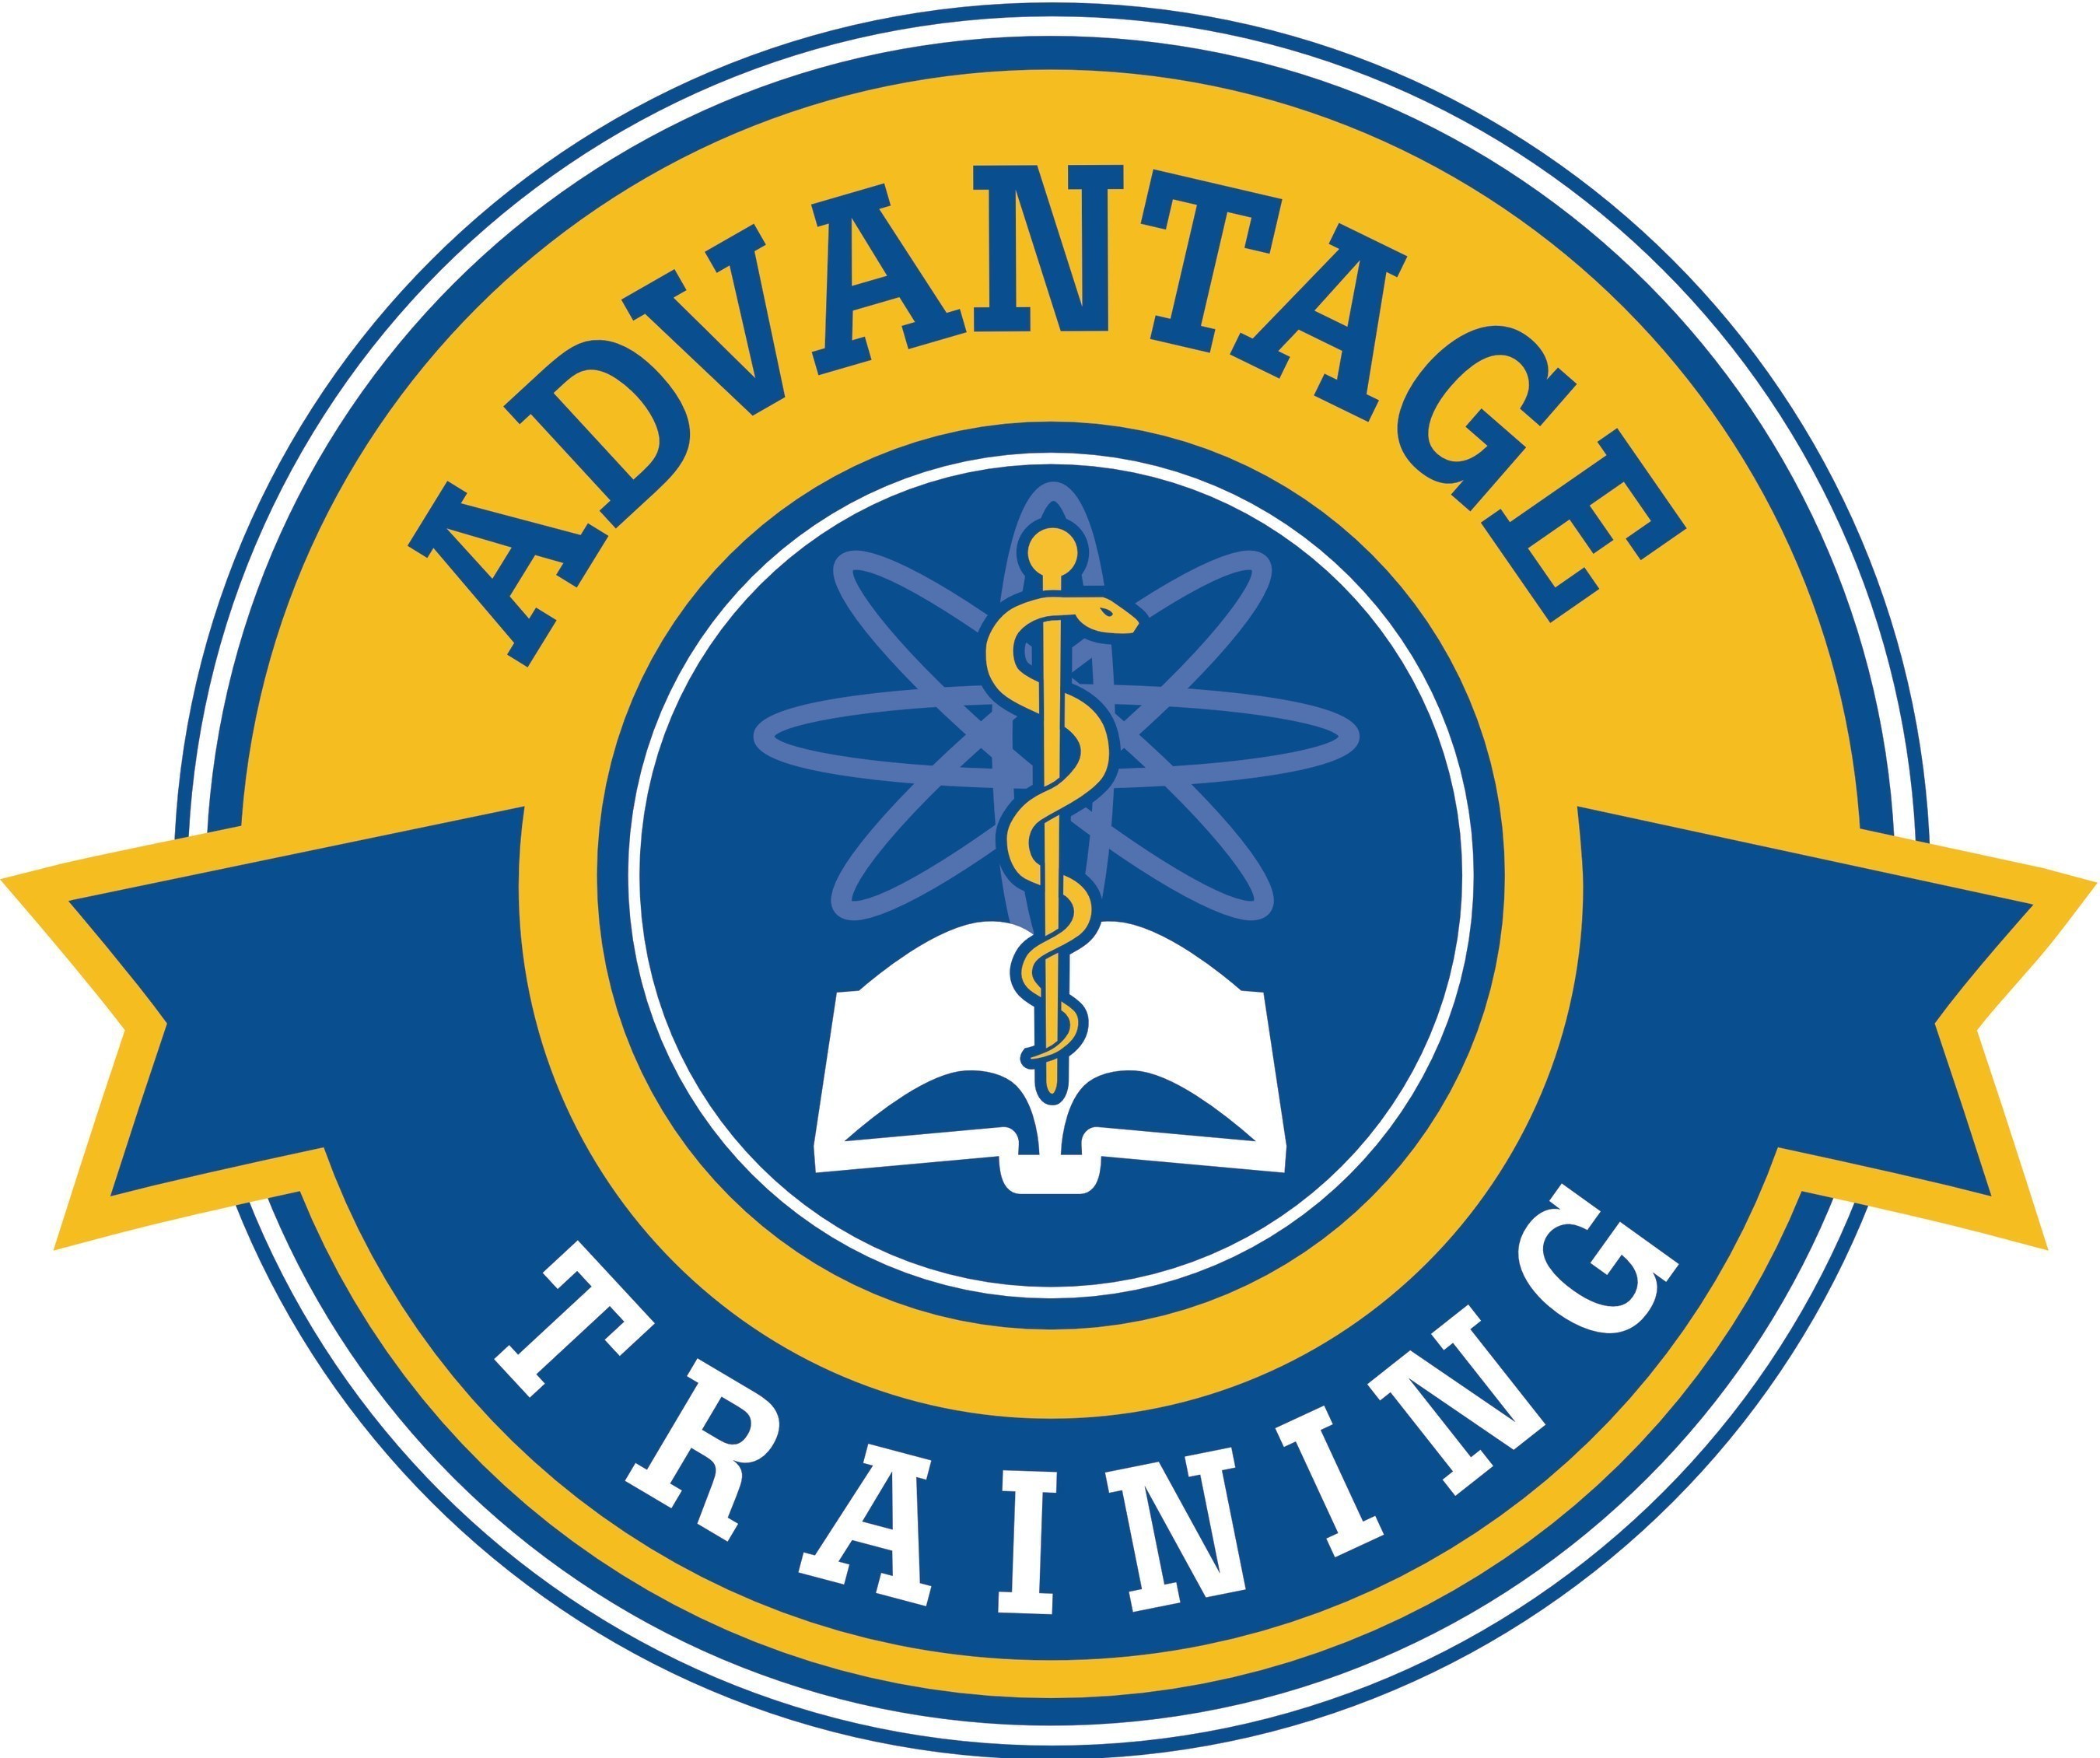 The Advantage Training Center features curriculum that covers the full spectrum of medical device preventive maintenance and quality assurance for biomedical and diagnostic imaging equipment. Training is available for all skills levels, and course topics range from introduction to basic terminology to advanced technical applications.